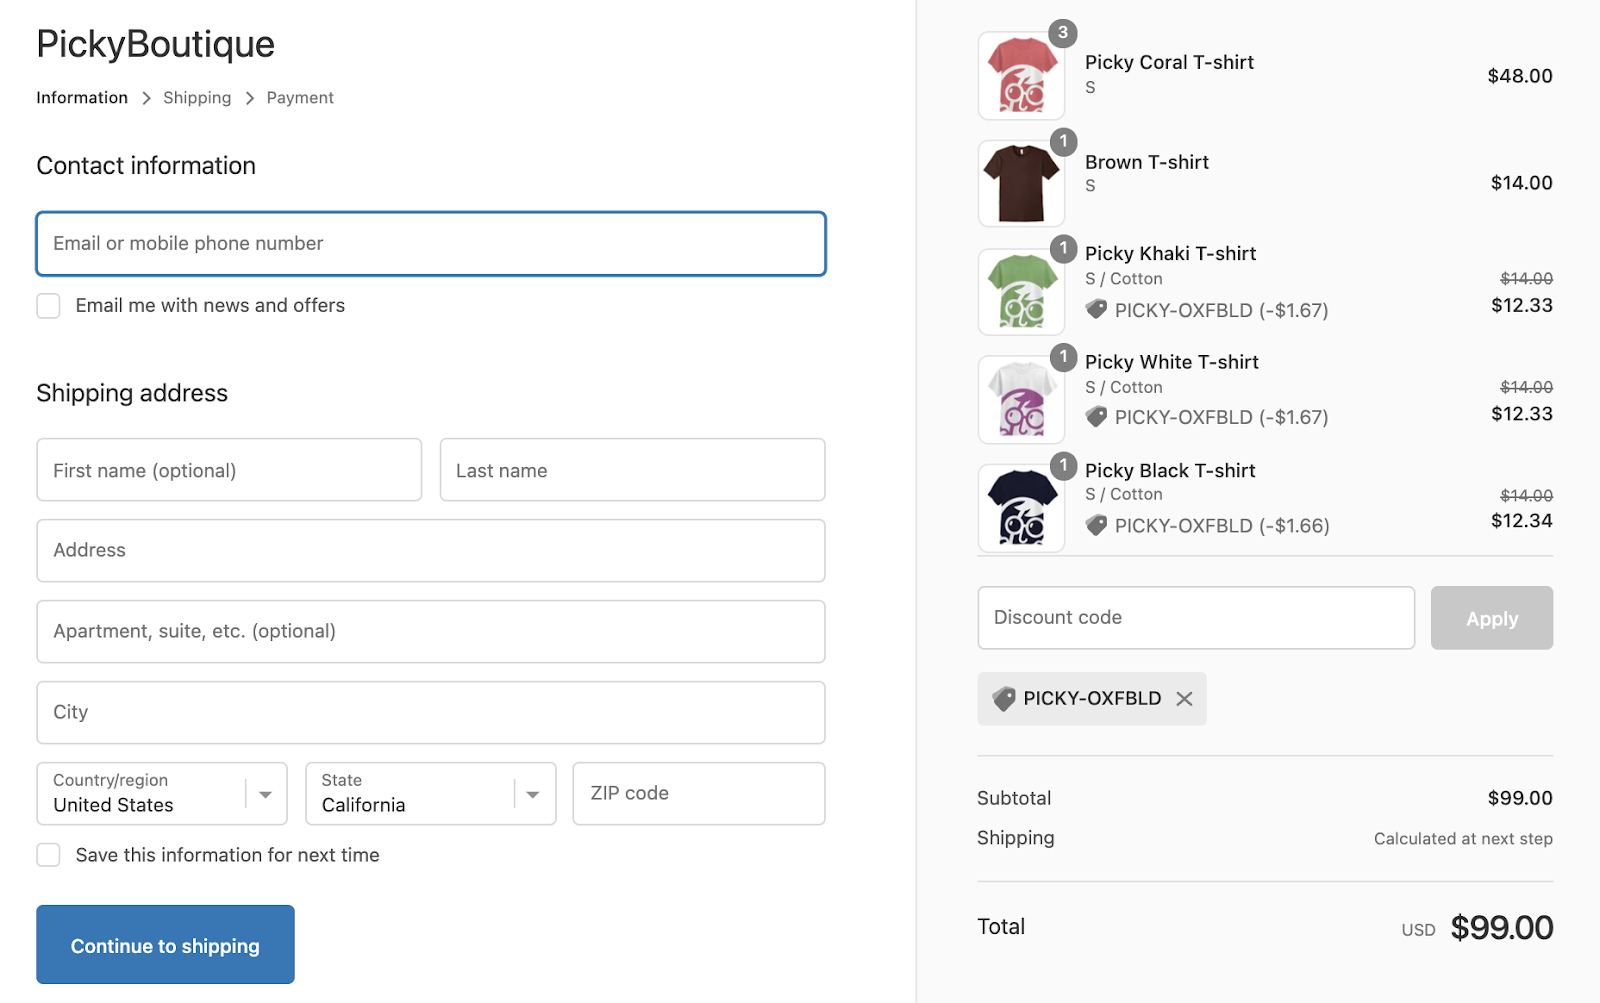 Shopify Plus offers customizable checkout pages
